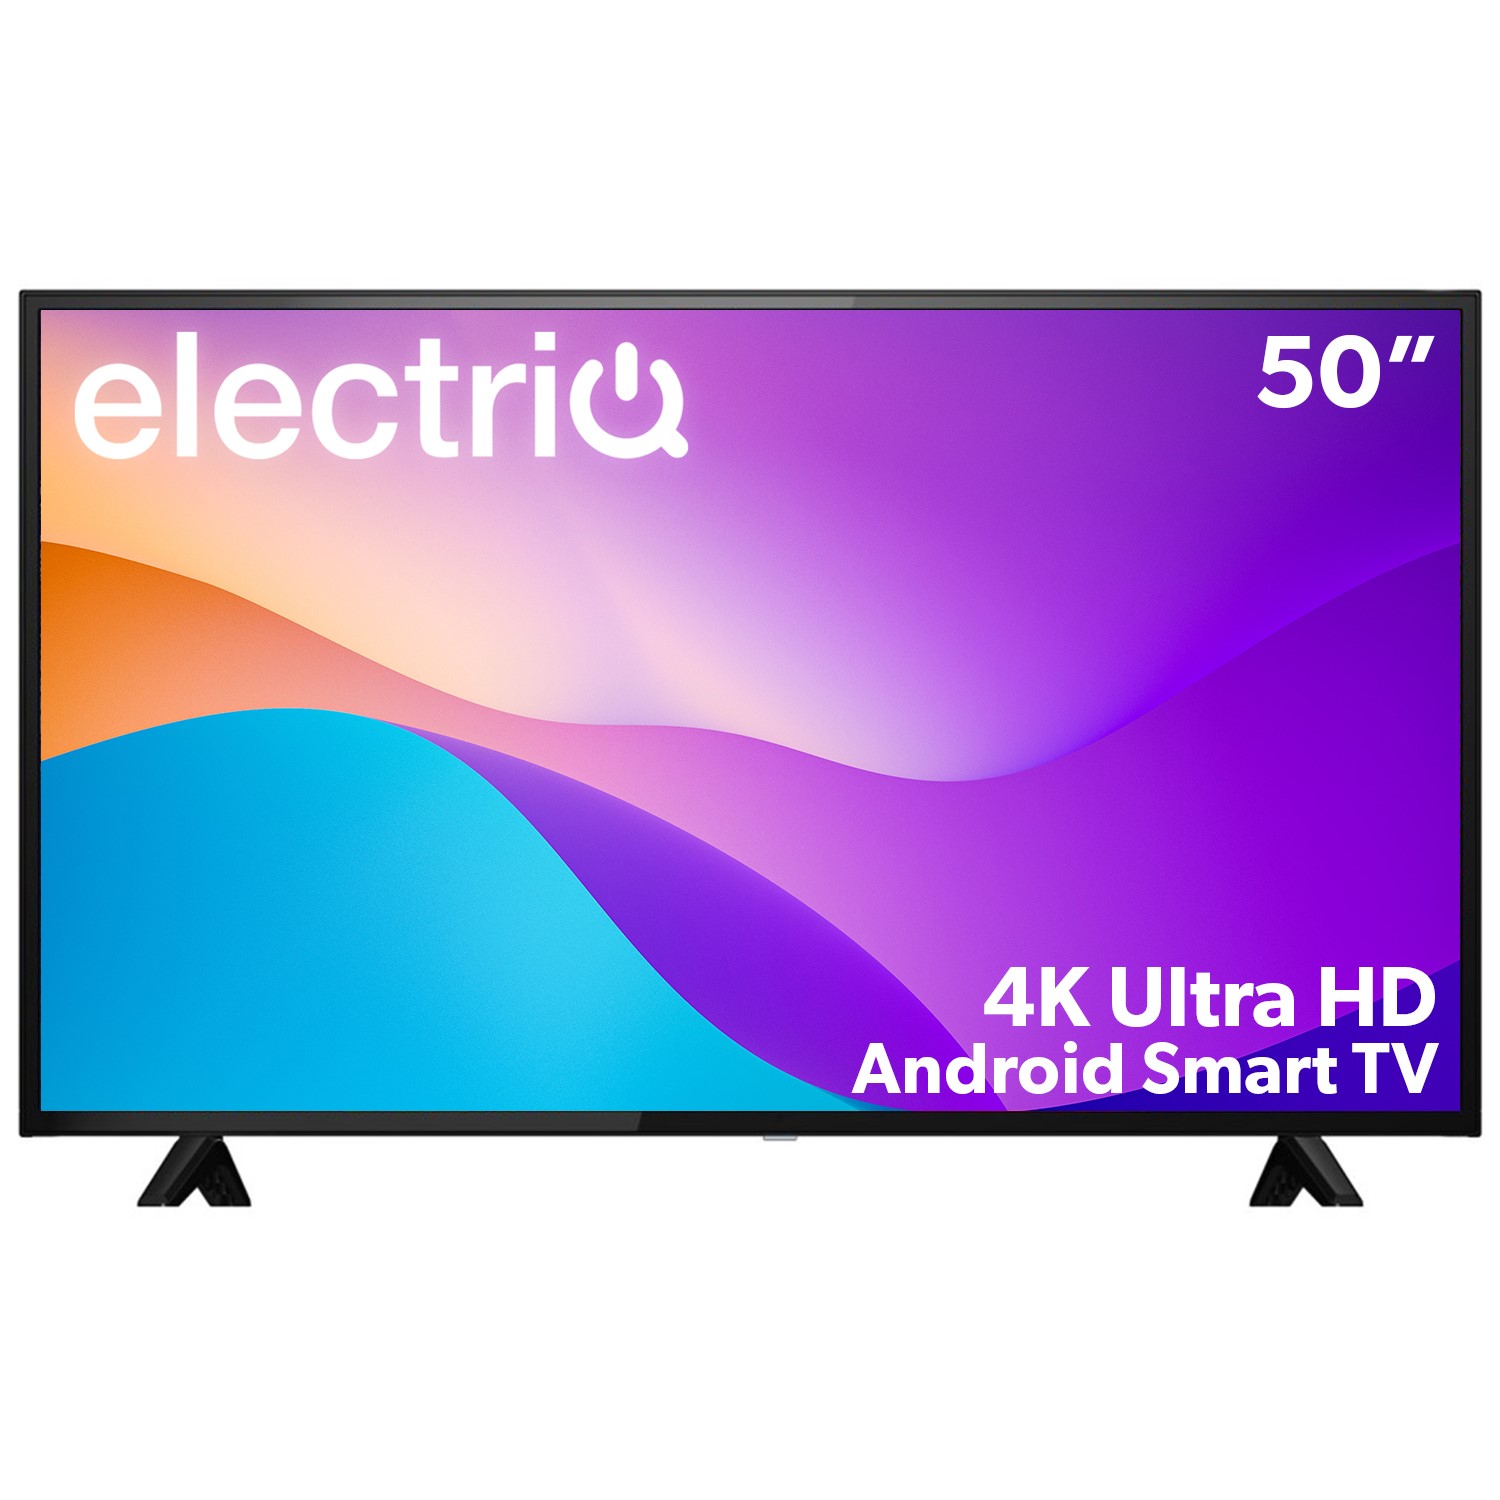 50 electriQ Android Smart 4K Ultra HD HDR LED TV with Freeview HD